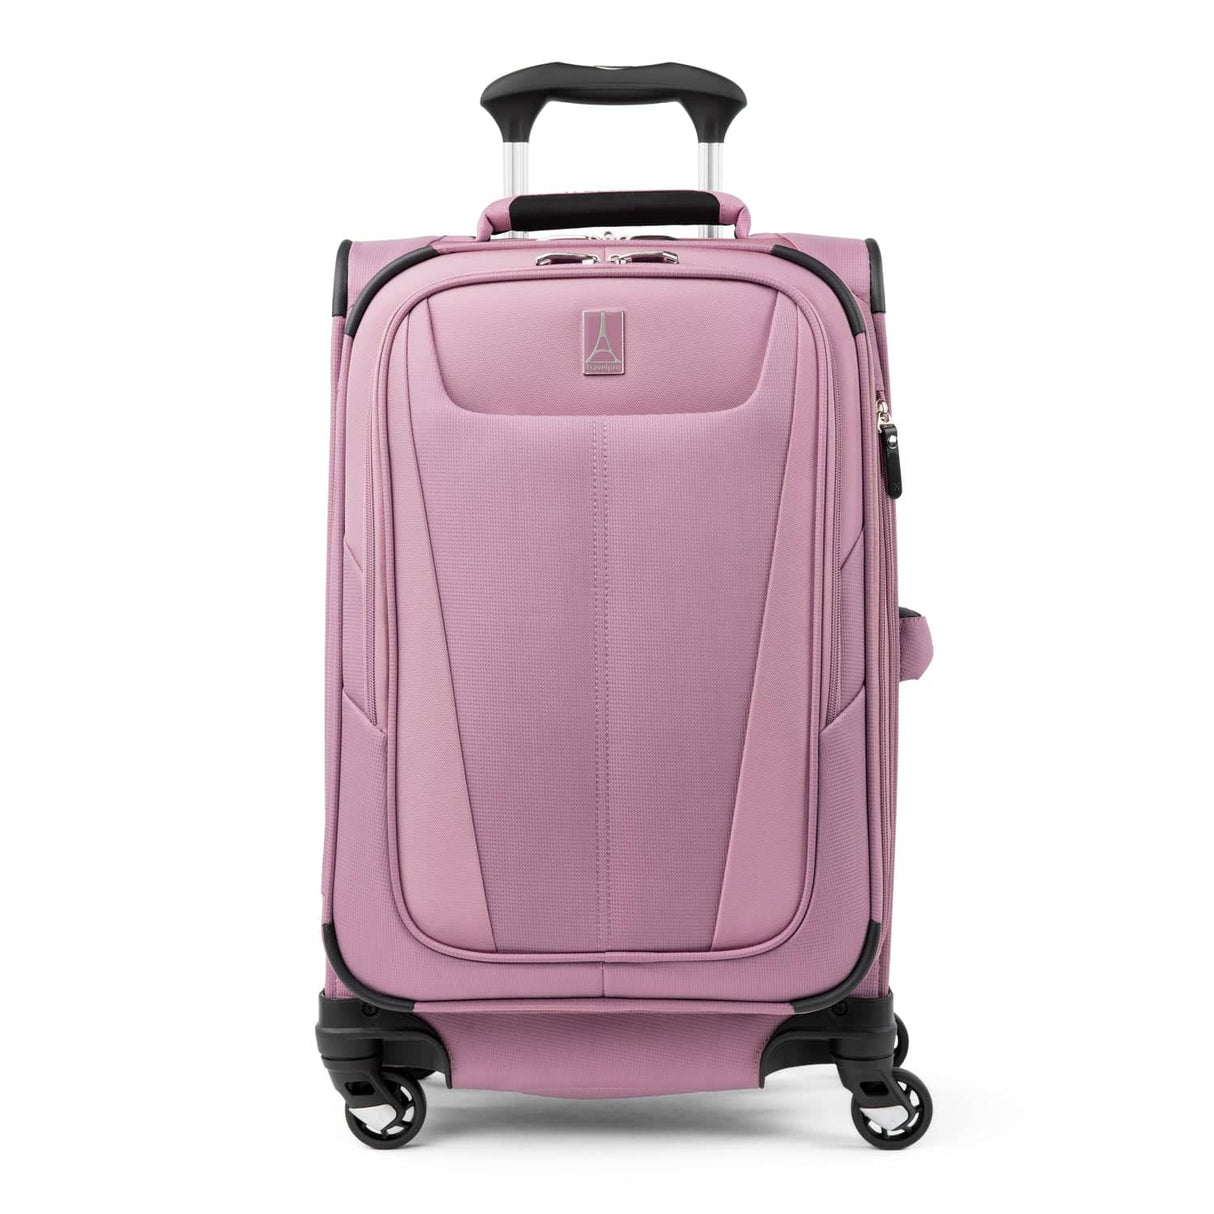 Travelpro Maxlite 5 21" Carry-On Expandable Spinner